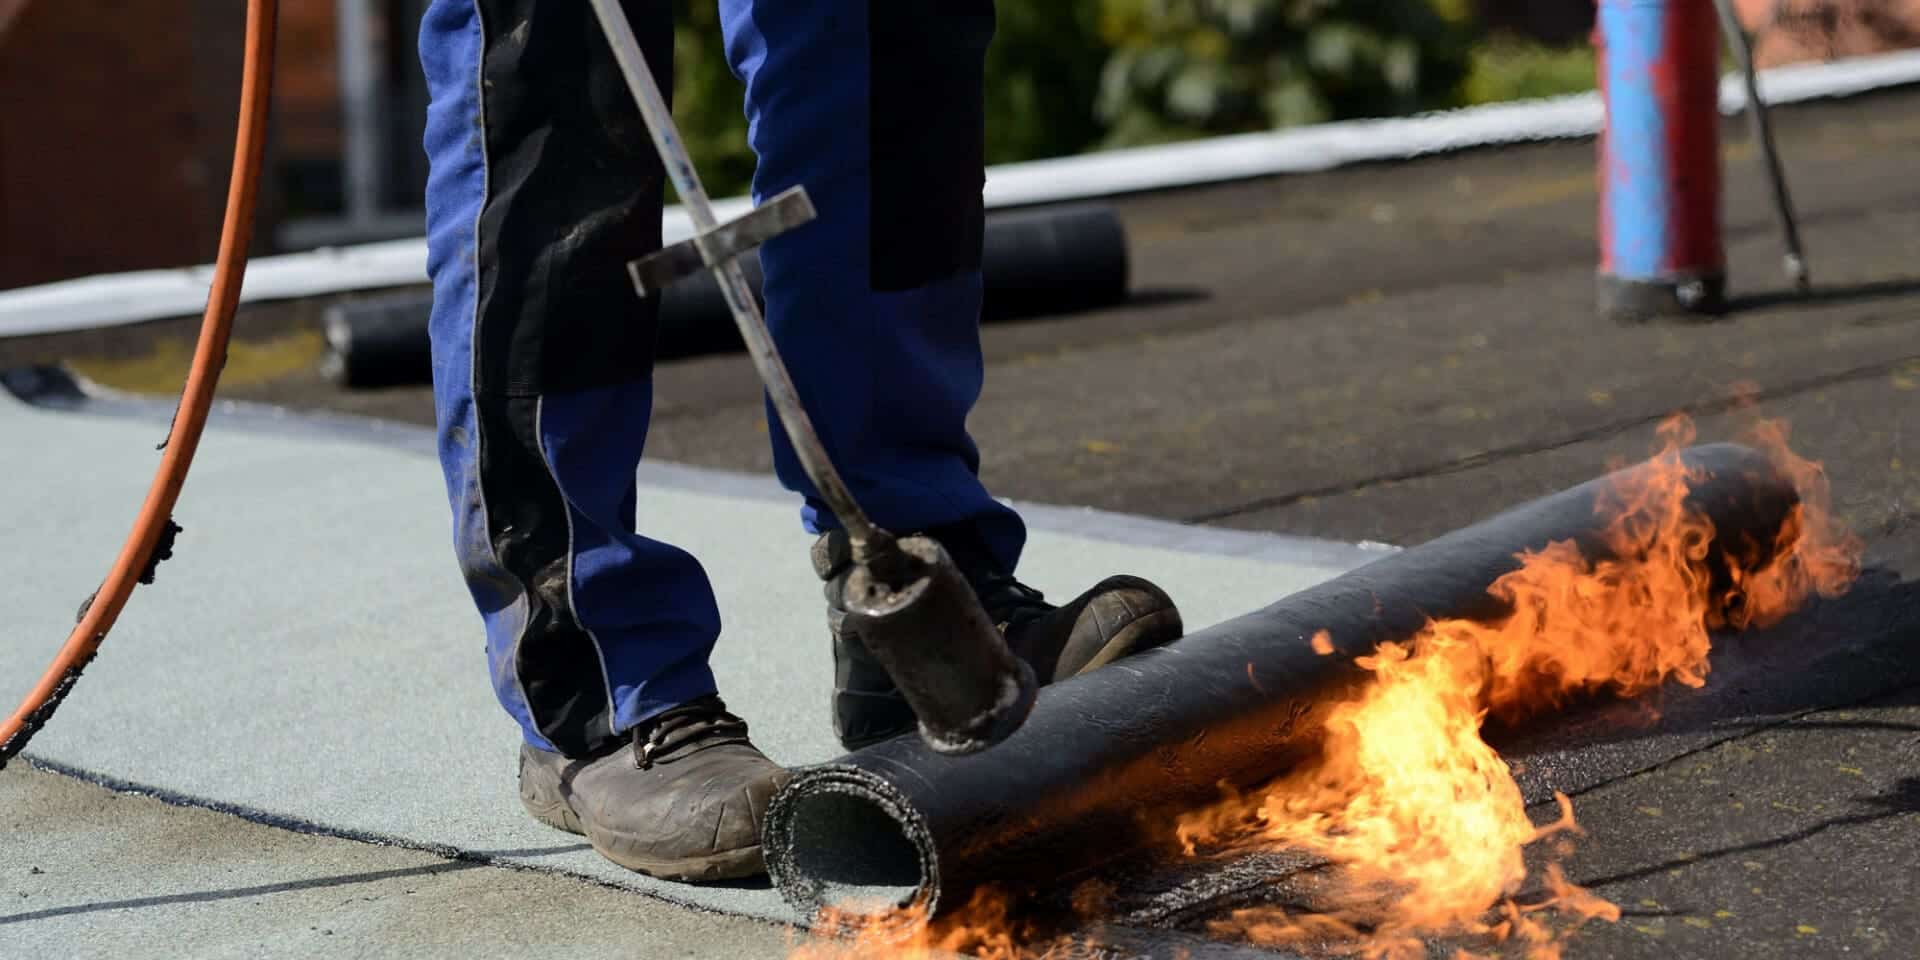 Commercial Re-roofing and Roof Replacement_ What's the Difference